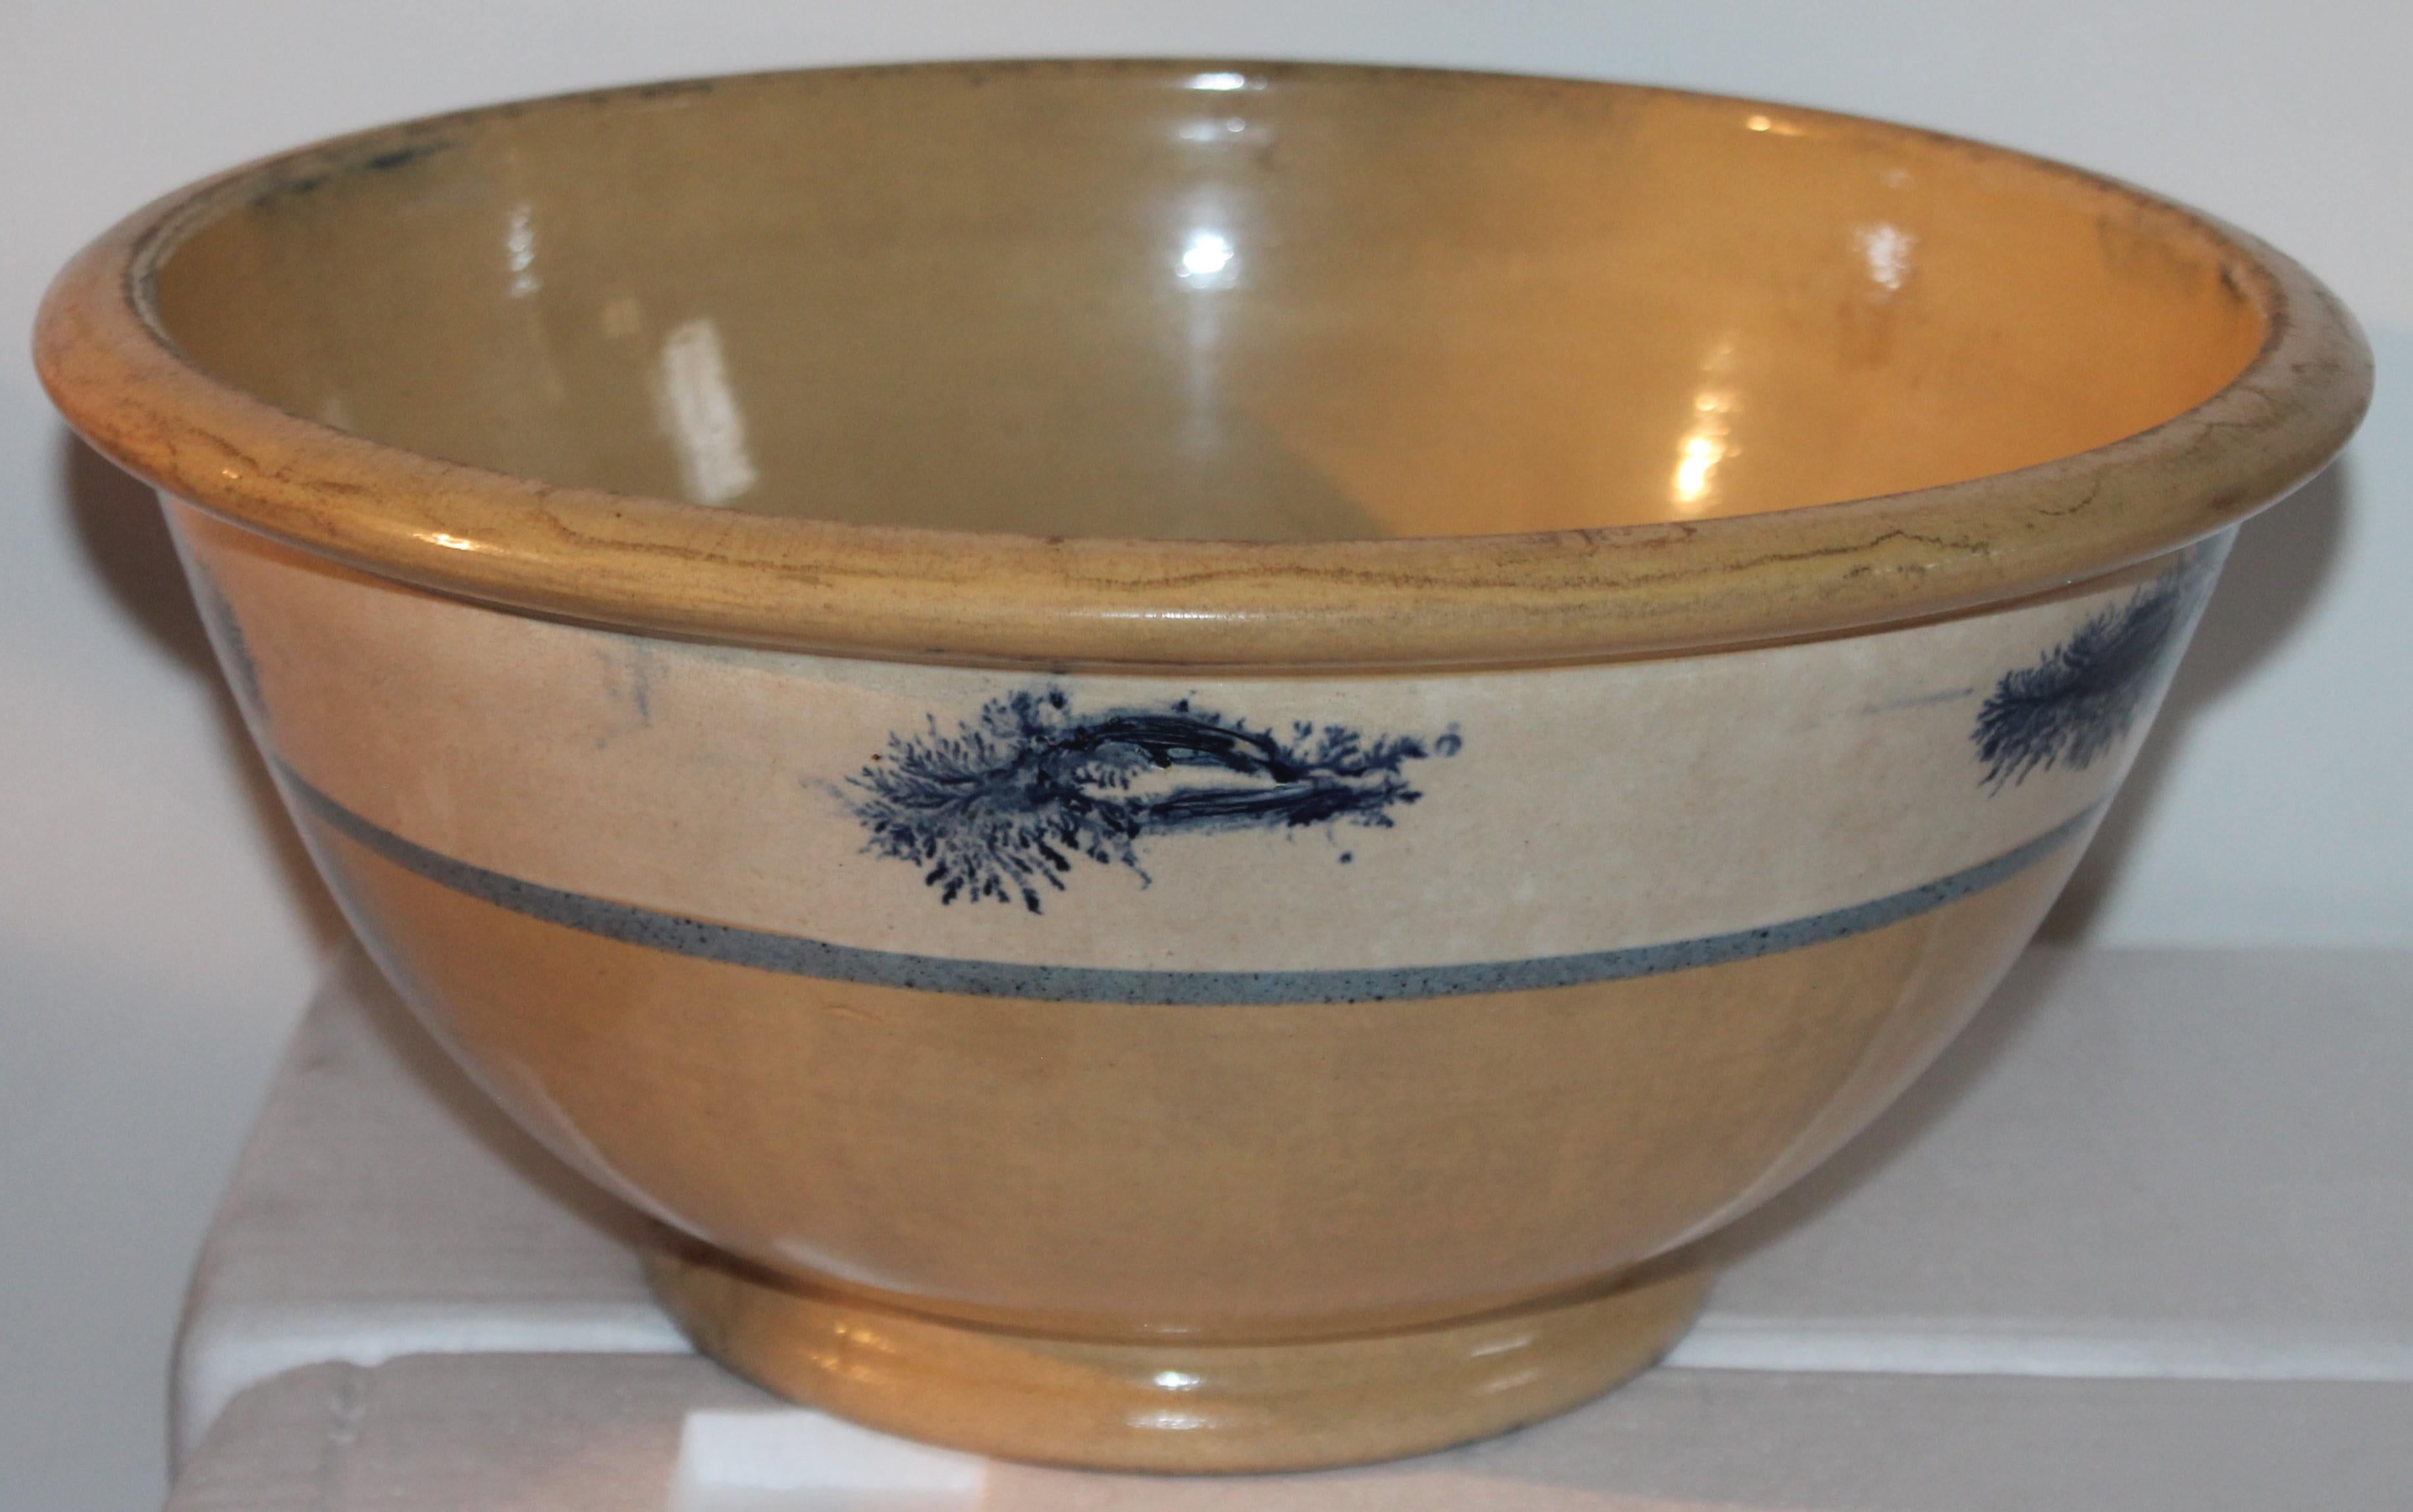 This 19th century mocha yellow ware mixing bowl with blue seaweed decoration. The condition is very good with lots of blue decorated seaweed pattern.